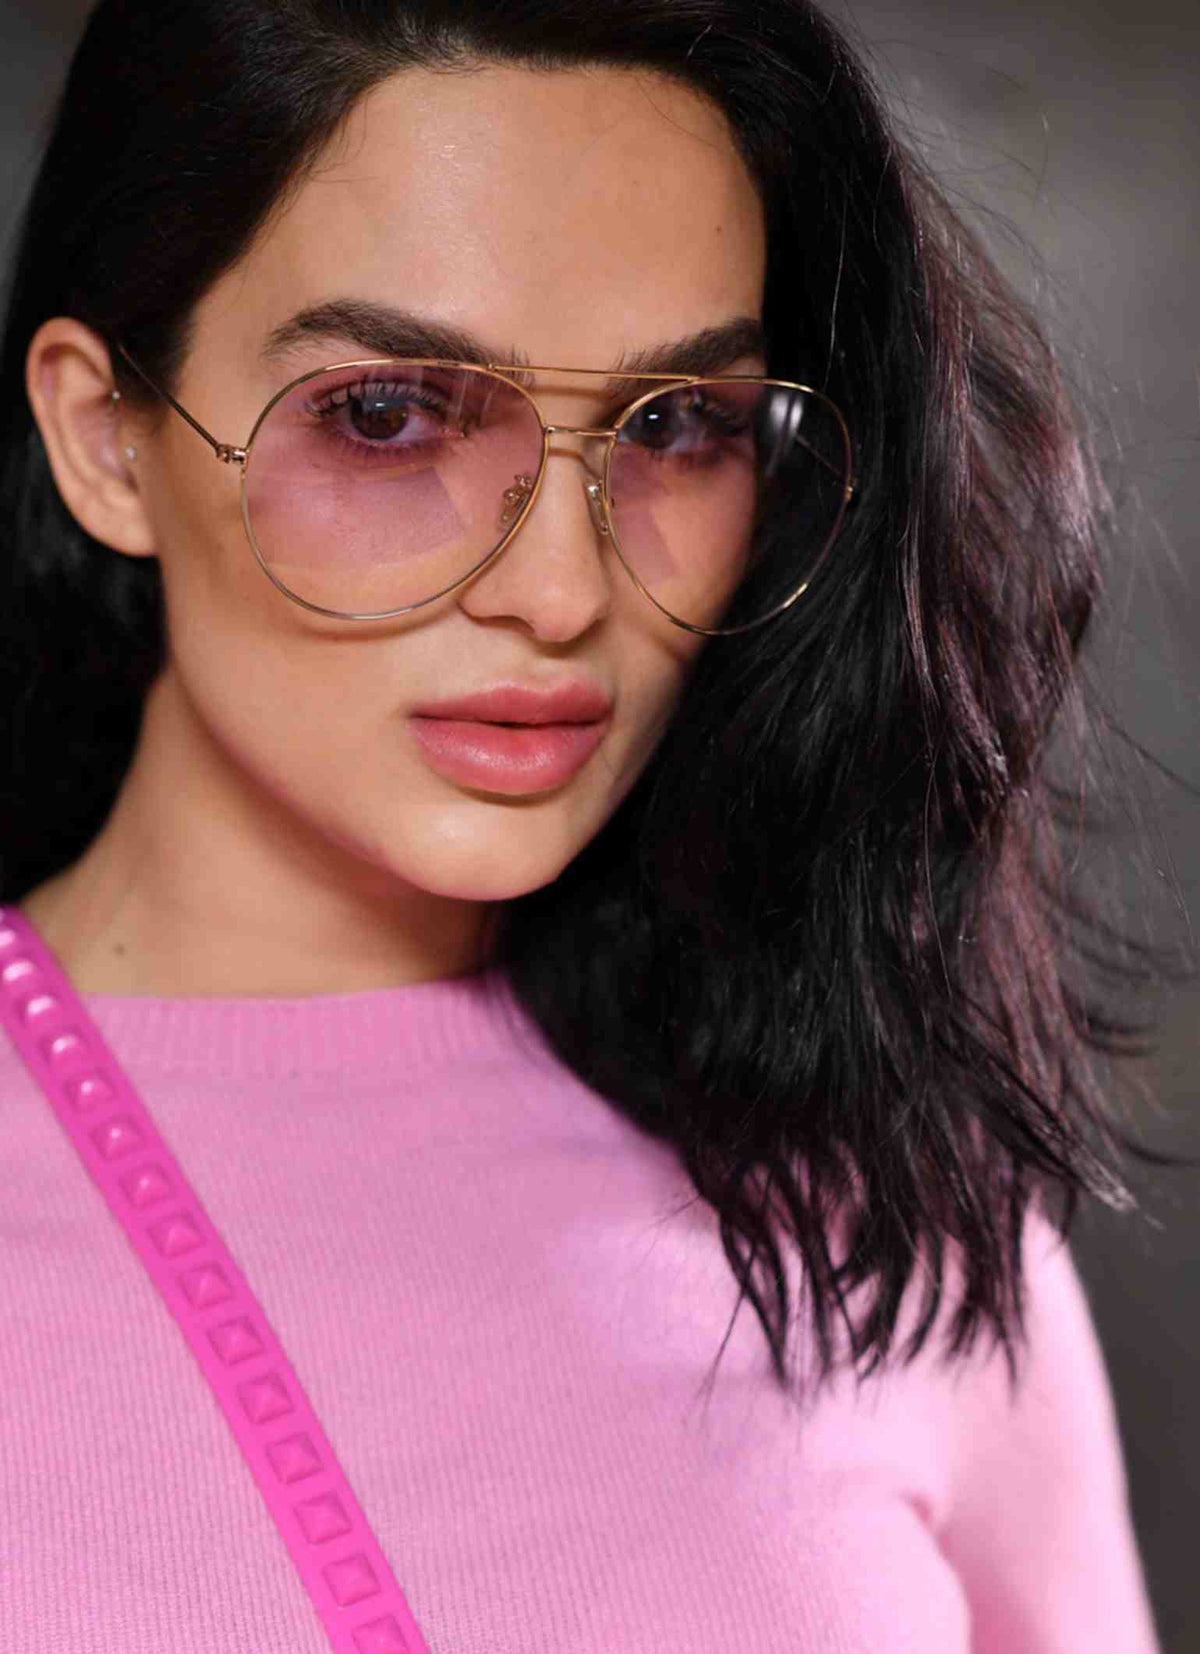 Aviator sunglasses women in color pink with matching cashmere sweater also in color pink